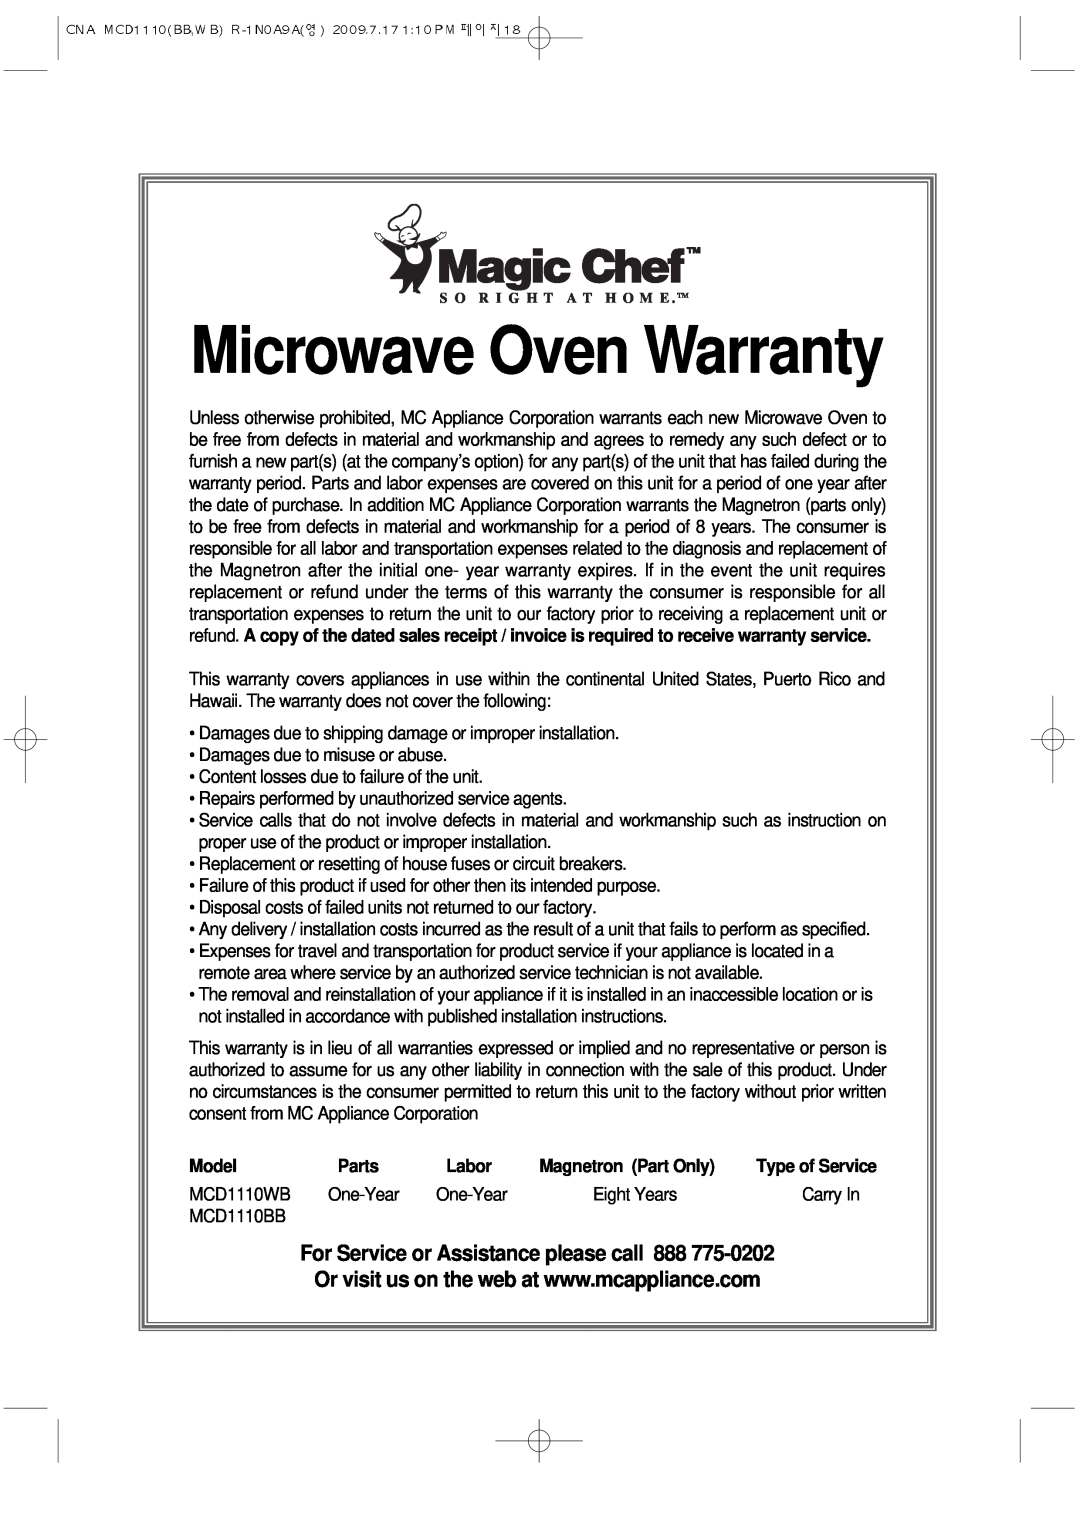 Magic Chef MCD1110WB manual Model, Parts, Labor, Magnetron Part Only, Microwave Oven Warranty 